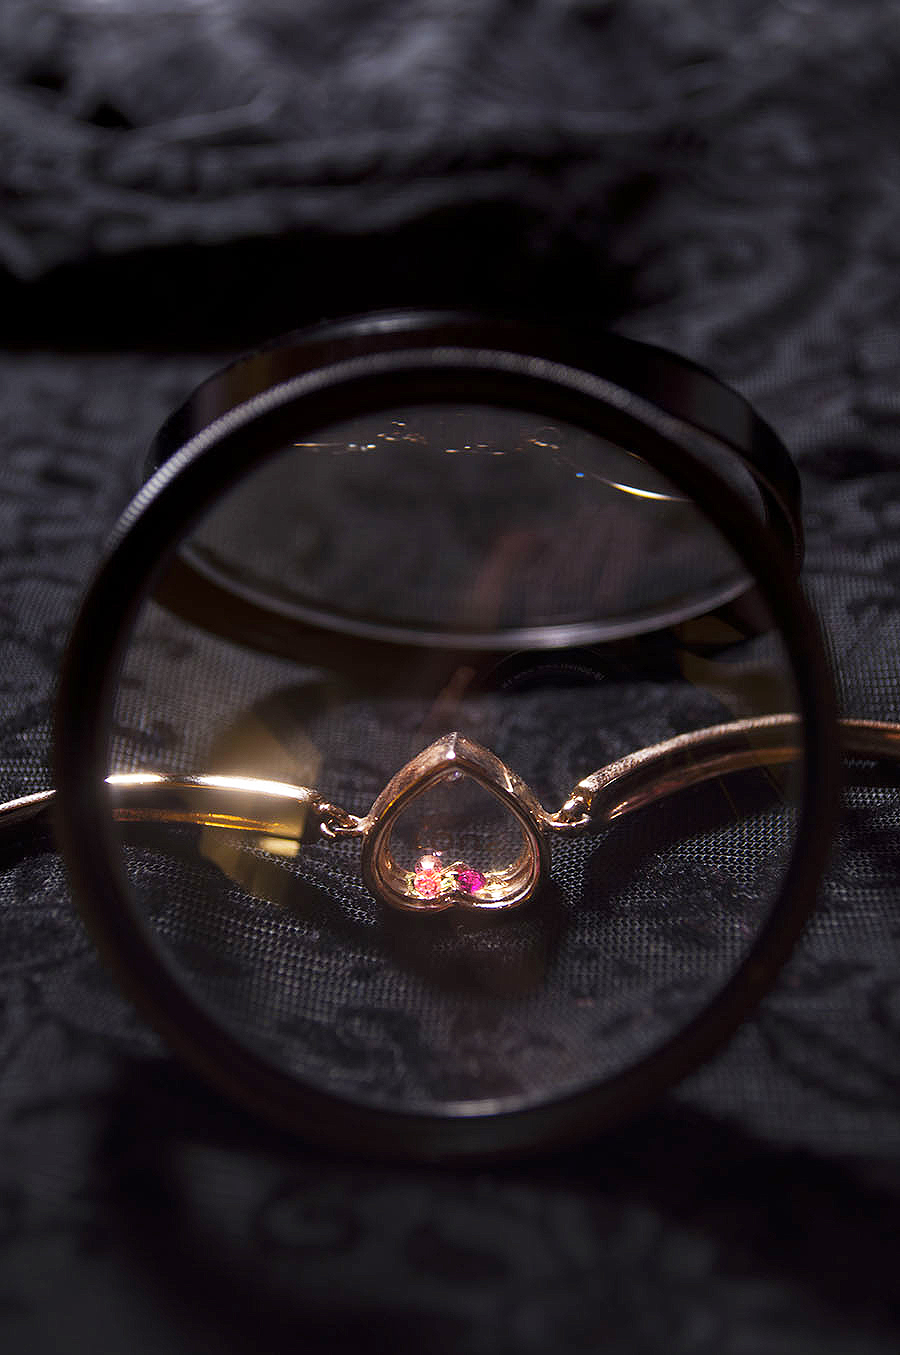 Rebecca_Huang_still_life_photography_dark_velvet_accessories_bracelet_jewelry_lens_magnifying_reflection_heart_gold_jewels_floral